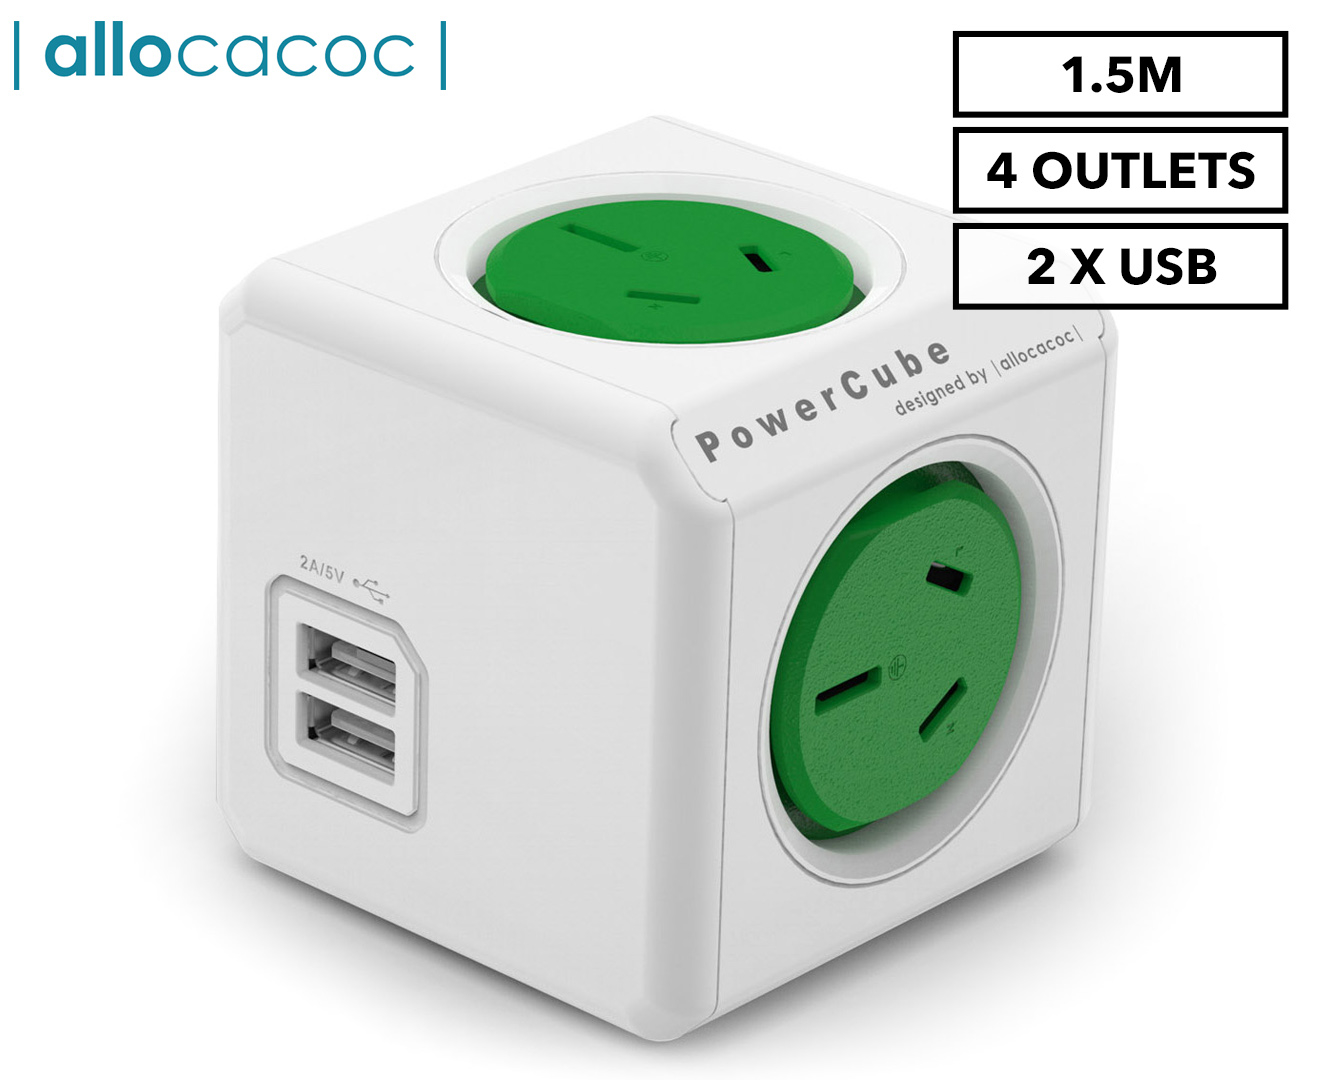 Allocacoc Power Cube PowerCube Charger 2 Outlet 2 USB No Cable